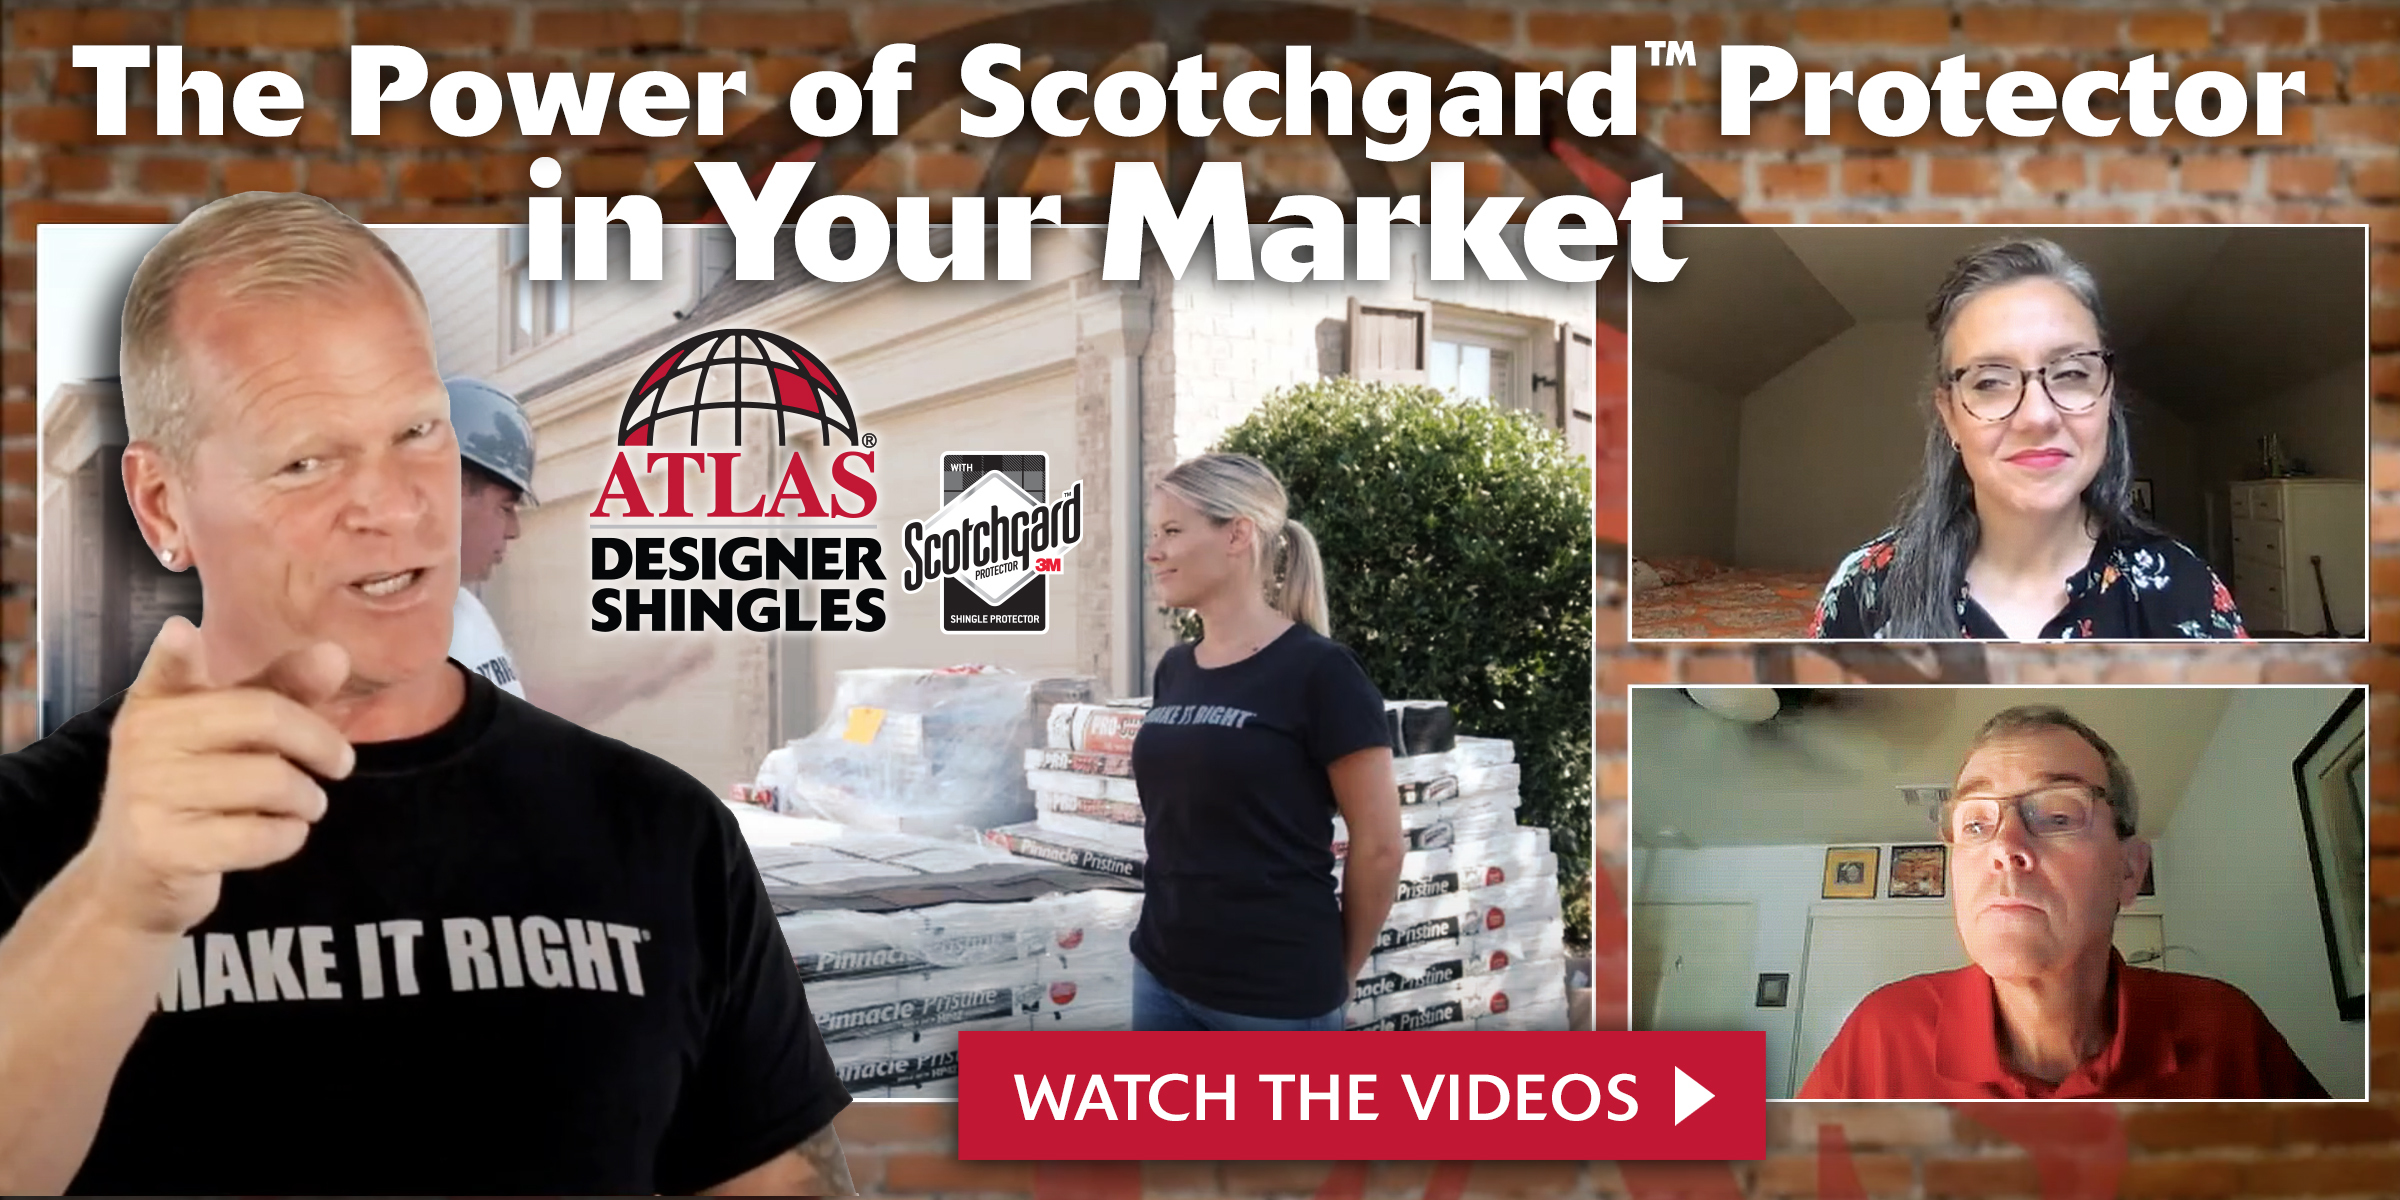 The Power of Scotchgard™ in Your Market